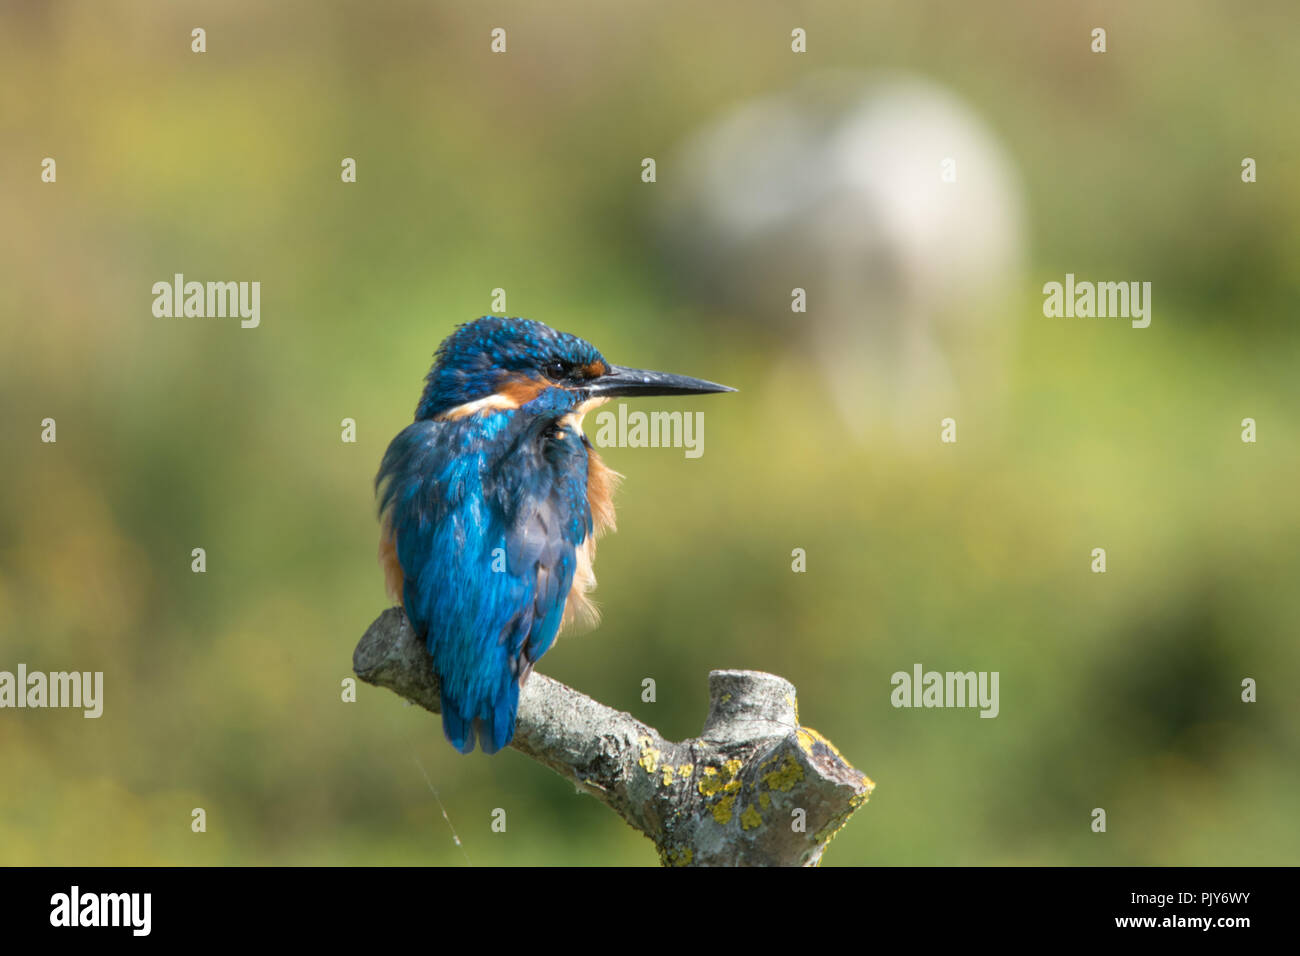 A stunning kingfisher (Alcedo atthis) at the Wildfowl and Wetlands Trust nature reserve in Arundel, West Sussex, UK. Stock Photo